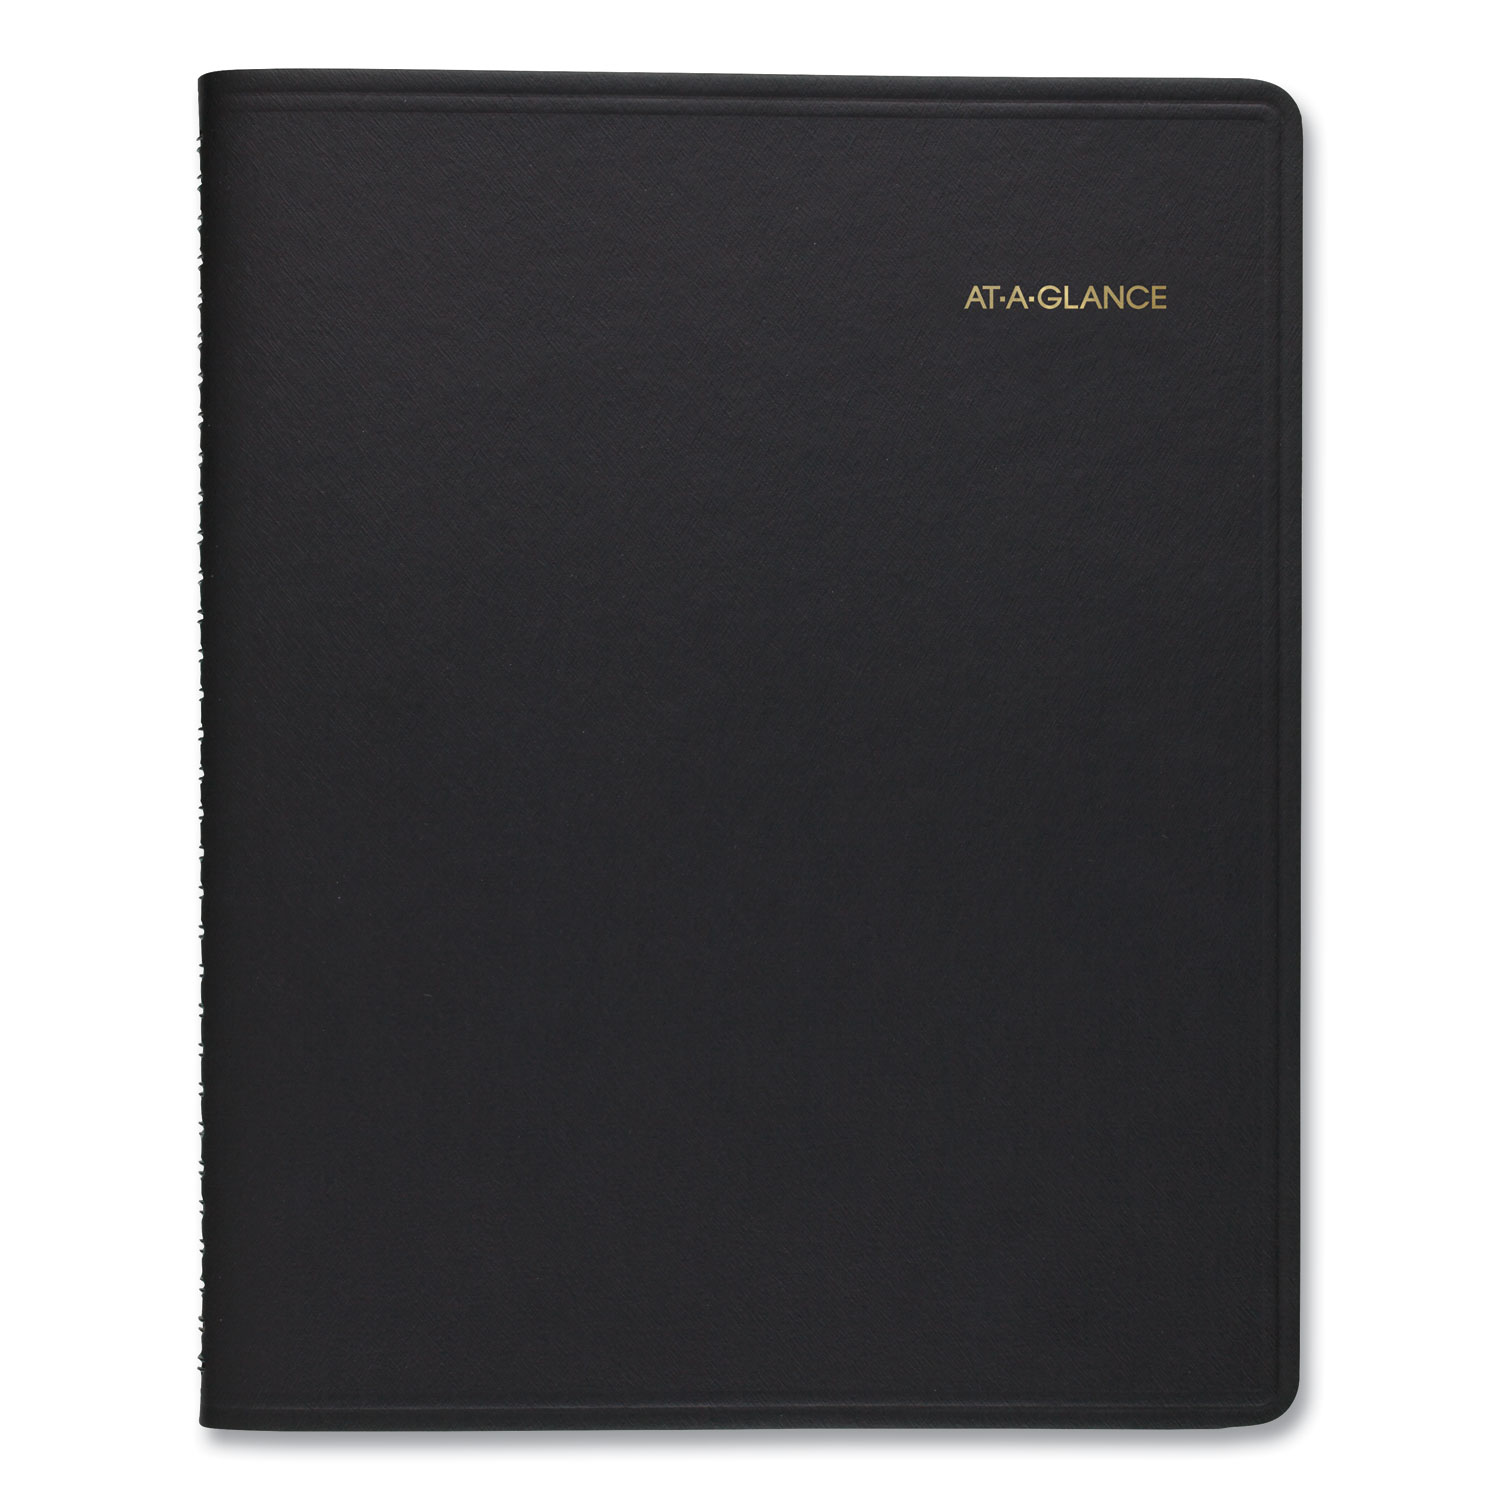  AT-A-GLANCE 7021405 24-Hour Daily Appointment Book, 10 3/4 x 8 1/2, White, 2020 (AAG7021405) 